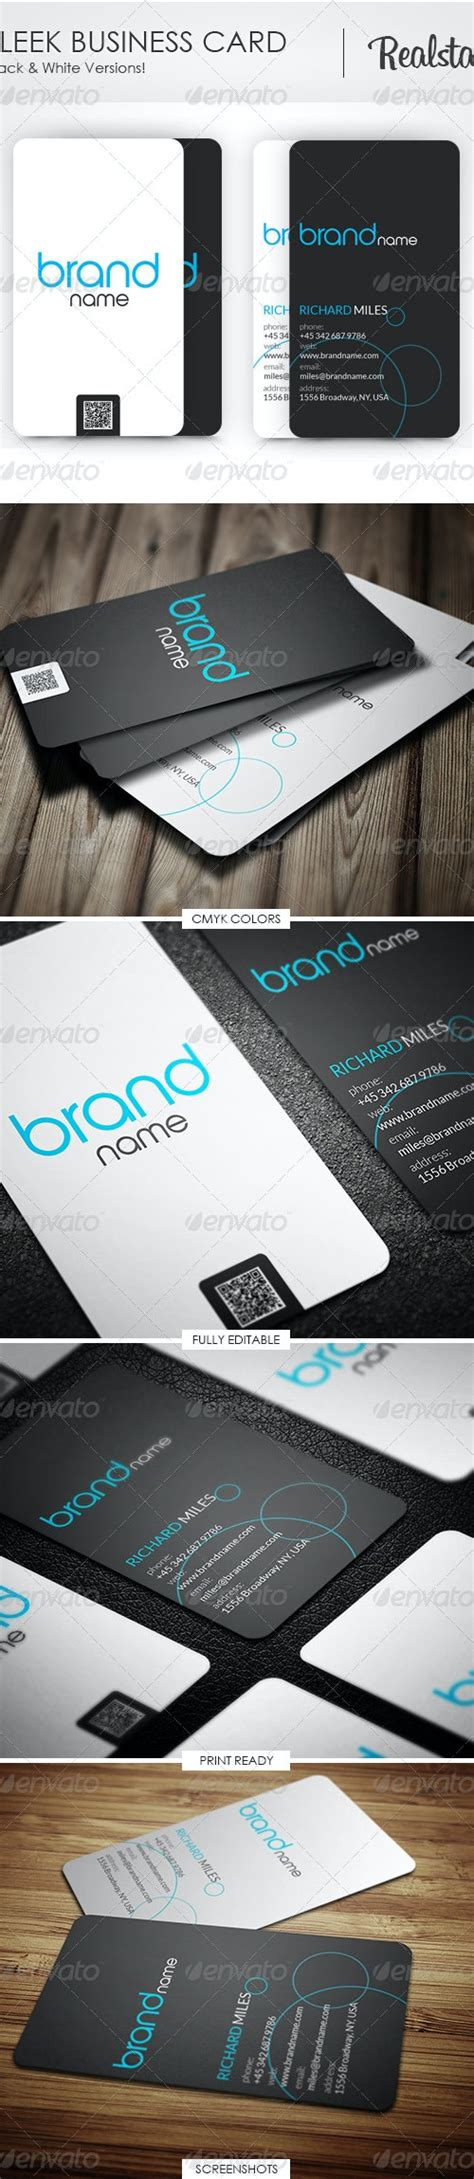 Sleek Business Card By Realstar Graphicriver